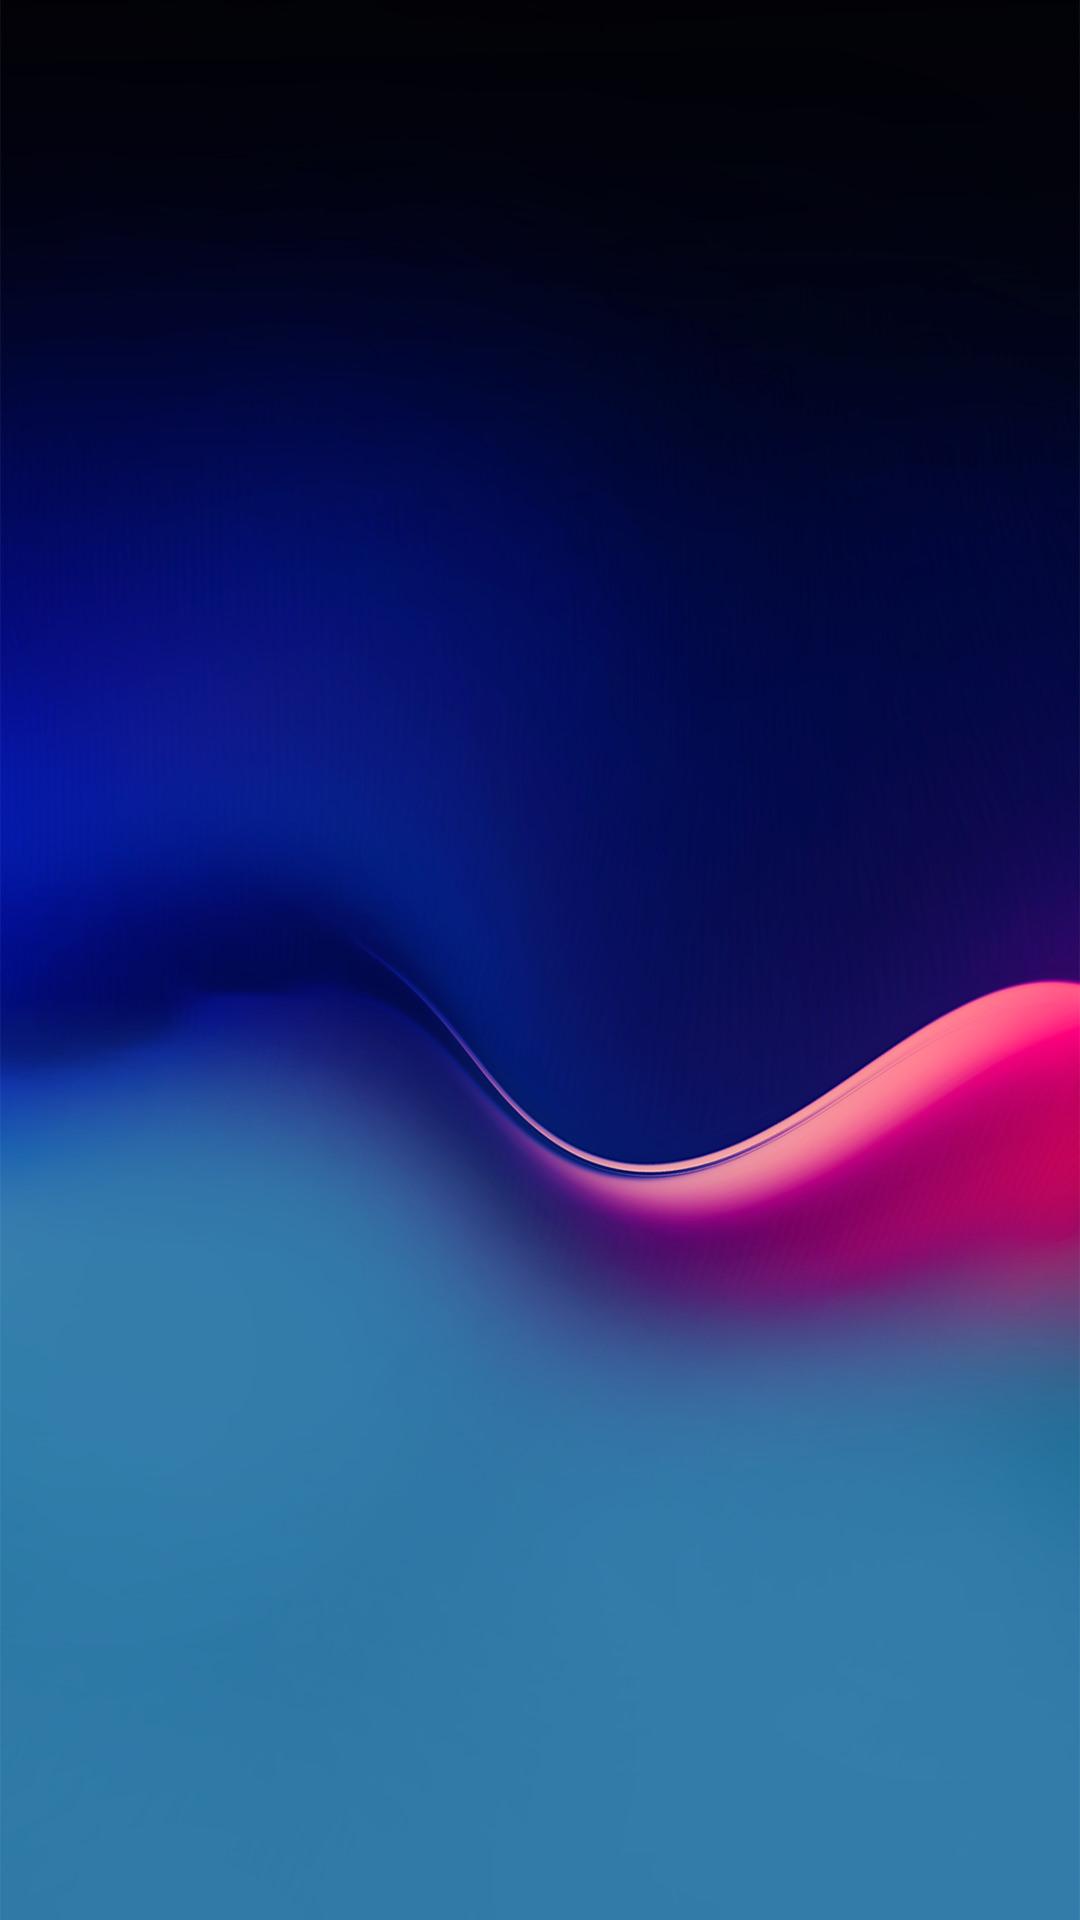 Abstract Waves by AR07 (link in the comments)